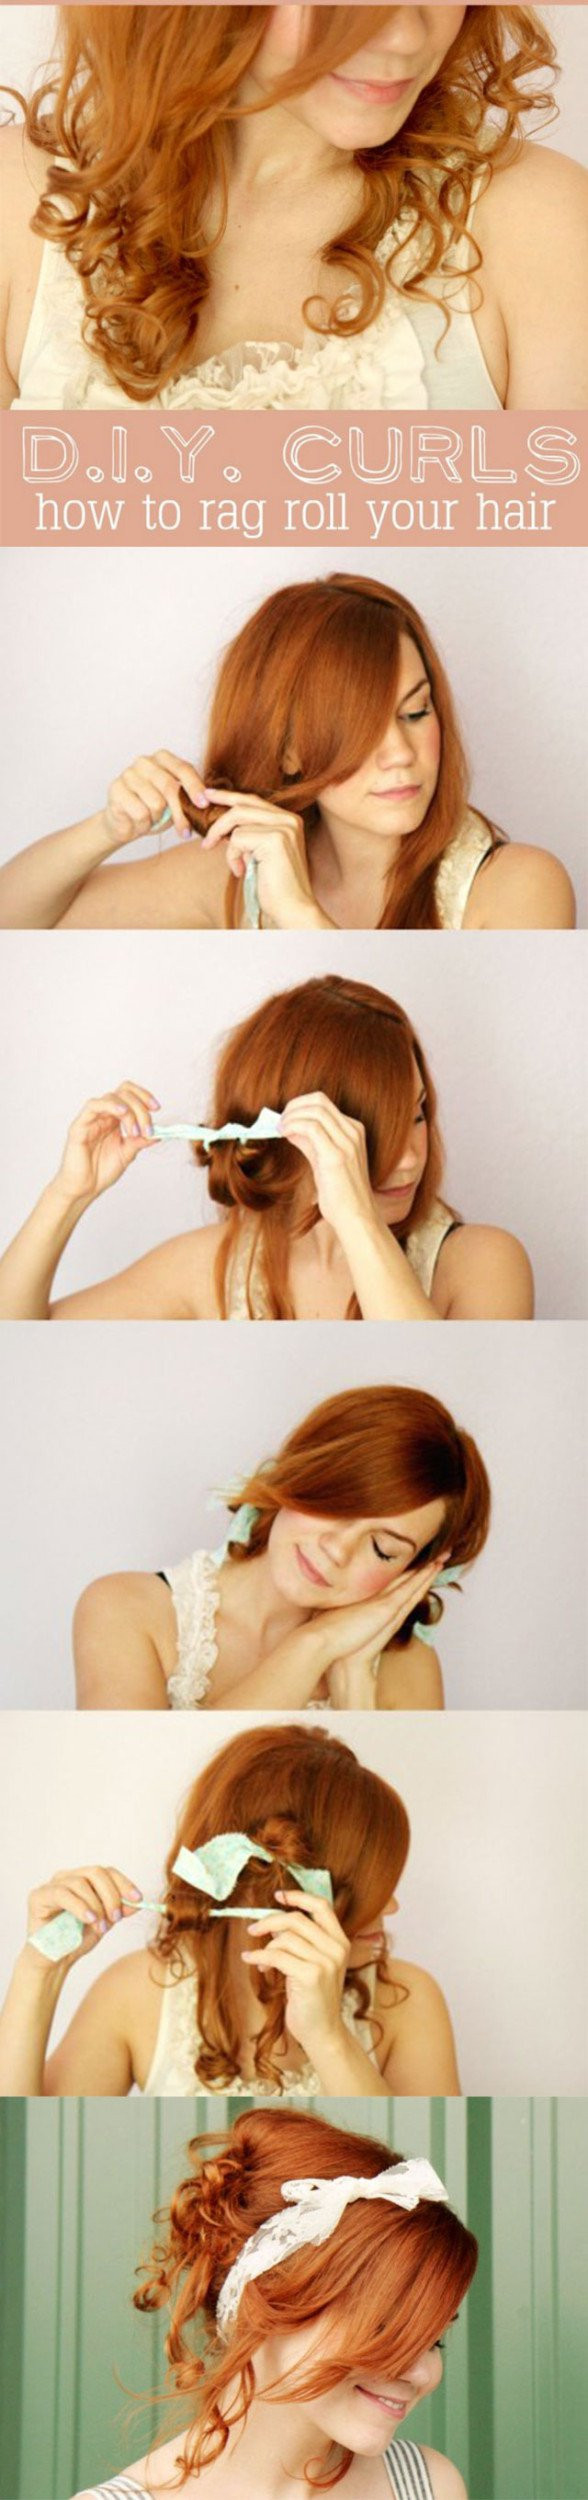 Cute Diy Hairstyles
 17 Easy DIY Tutorials For Glamorous and Cute Hairstyle